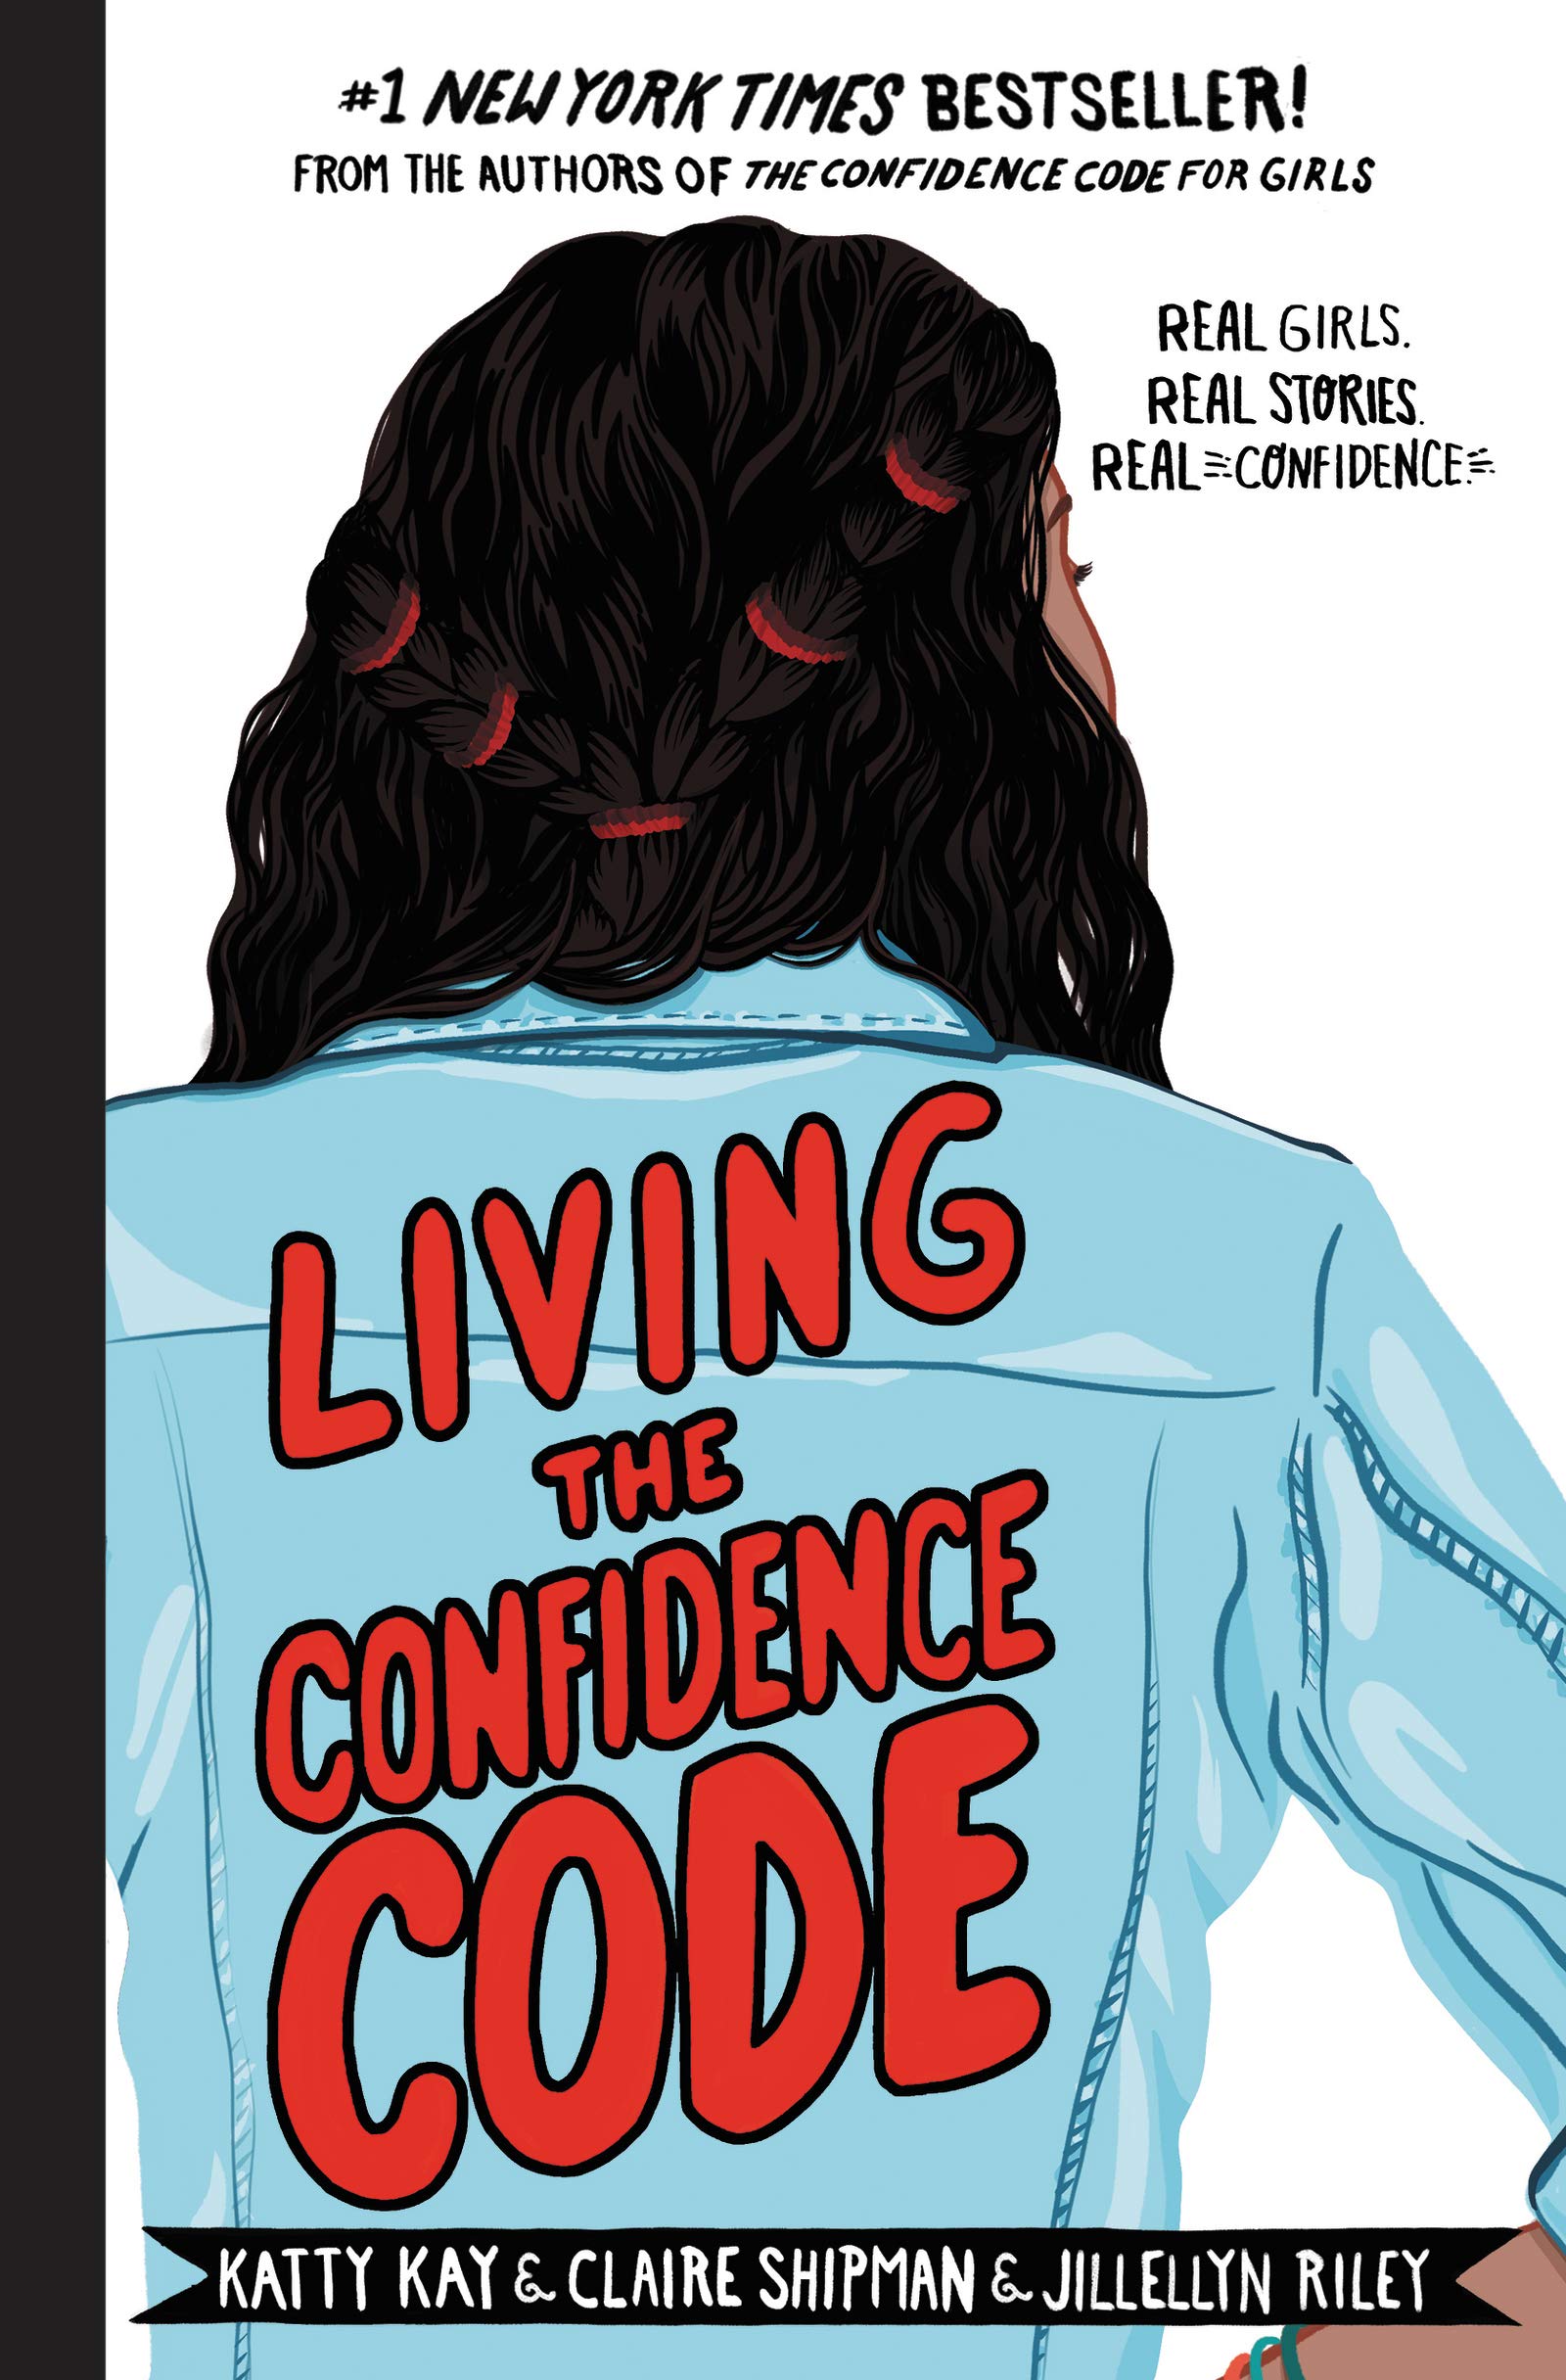 Book Review: Living the Confidence Code